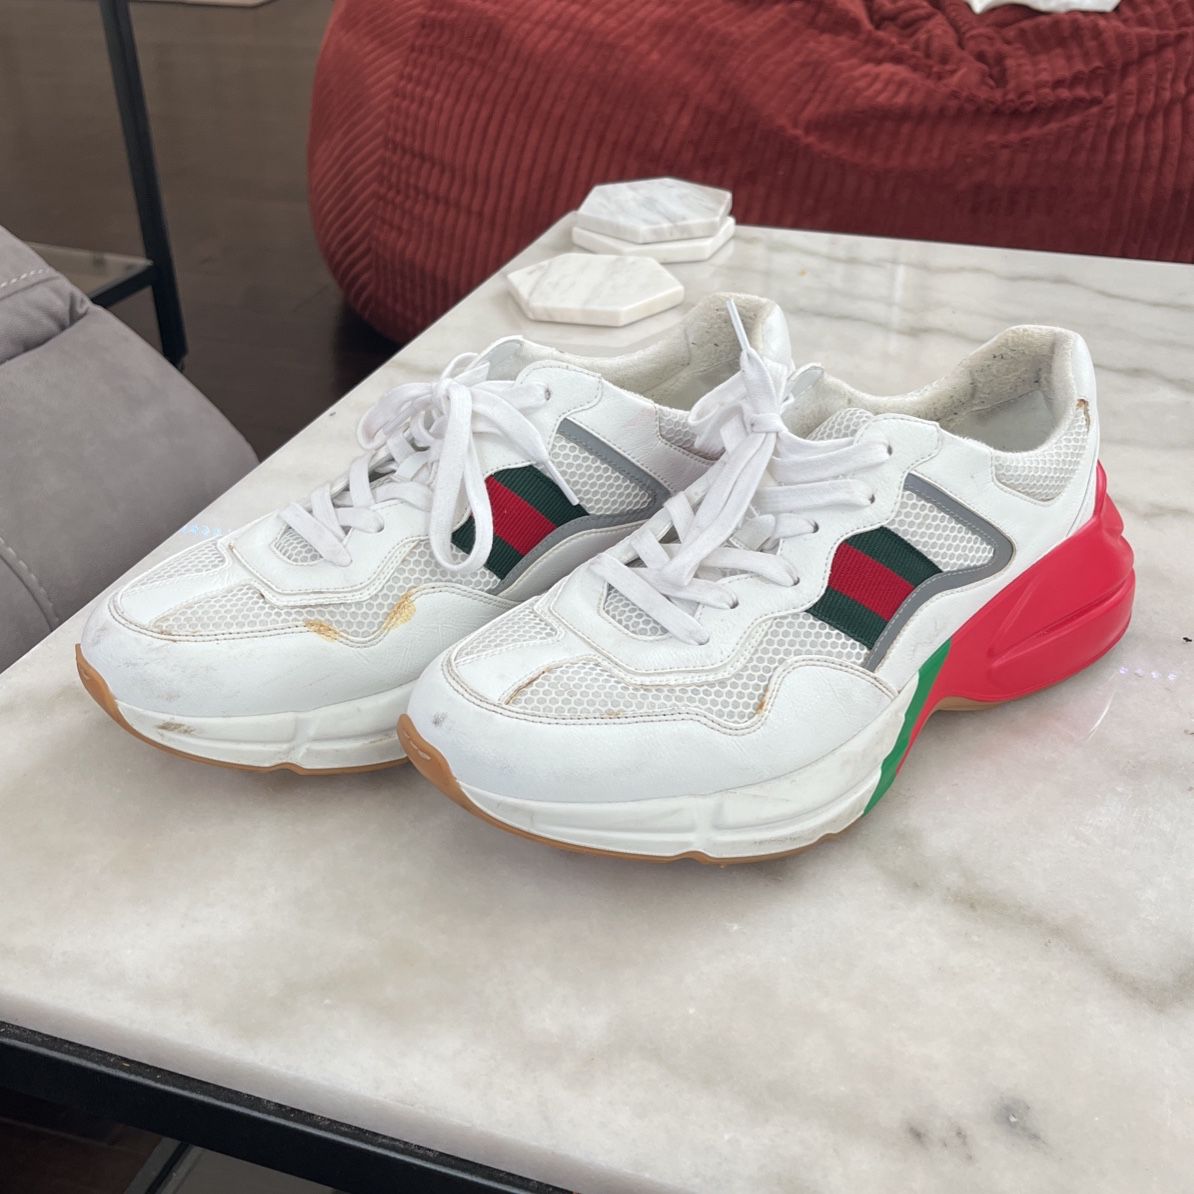 Gucci Rhyton White Green and Red Size 11